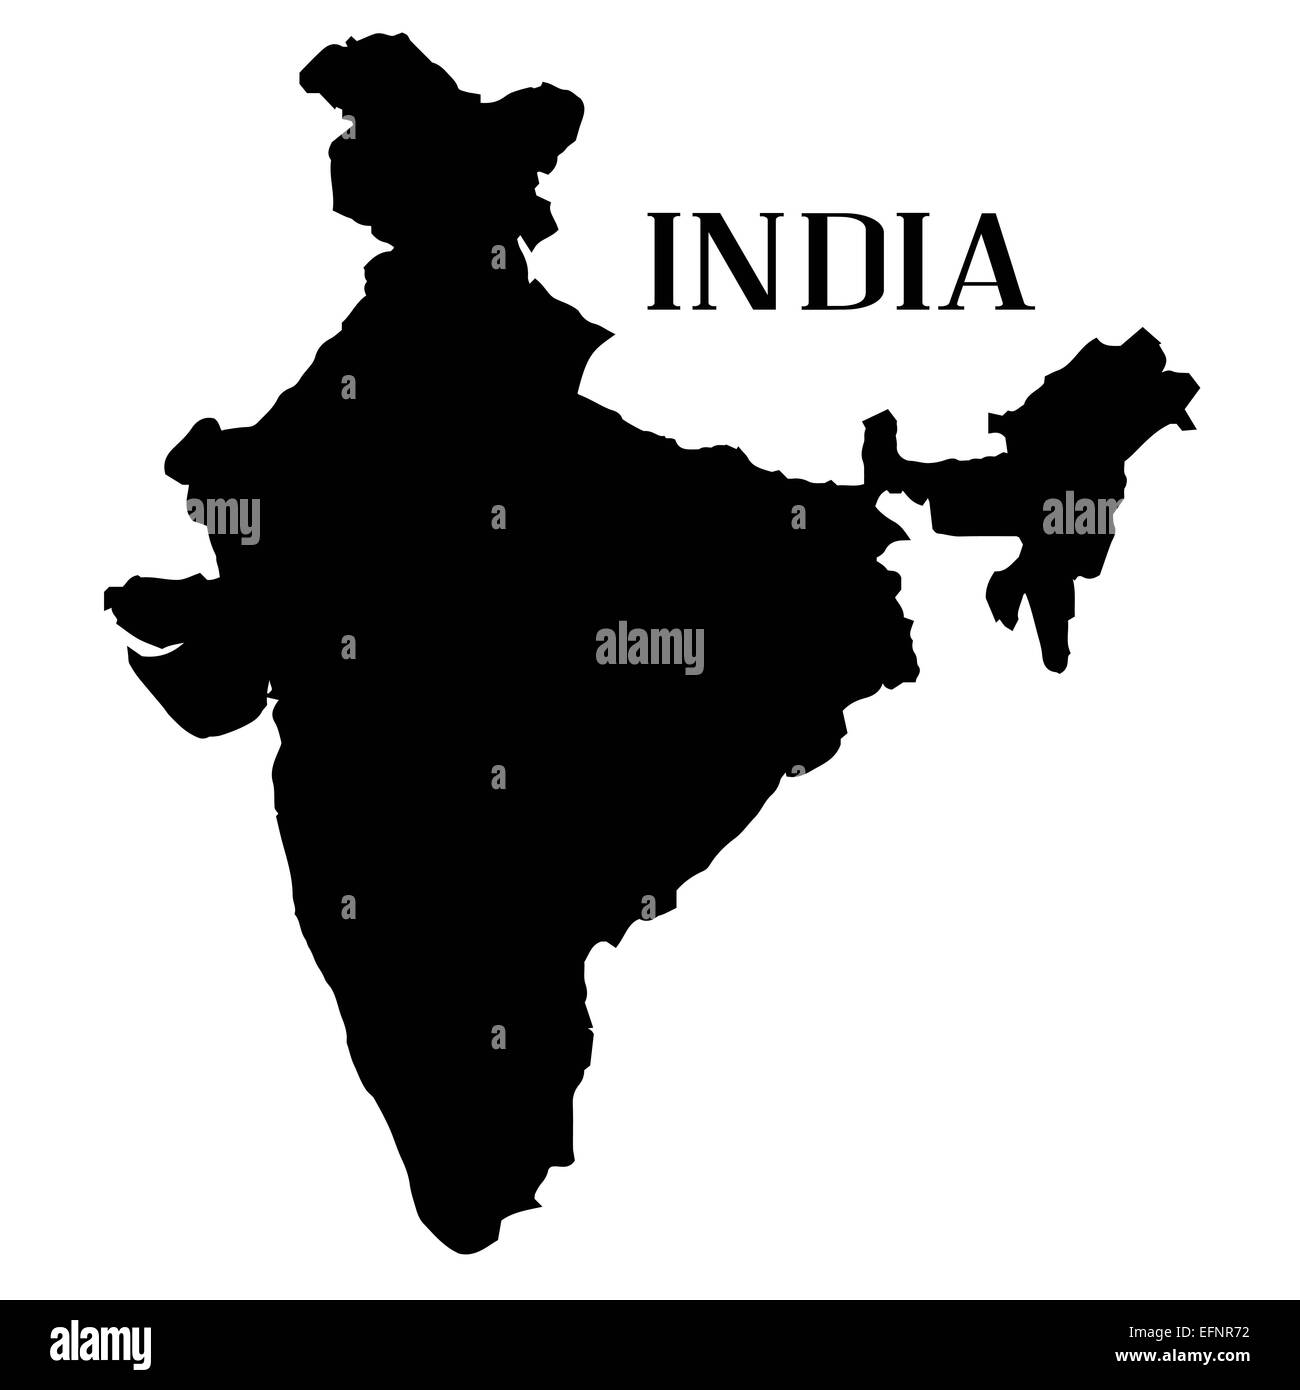 Outline map of India in silhouette on a white background Stock Photo